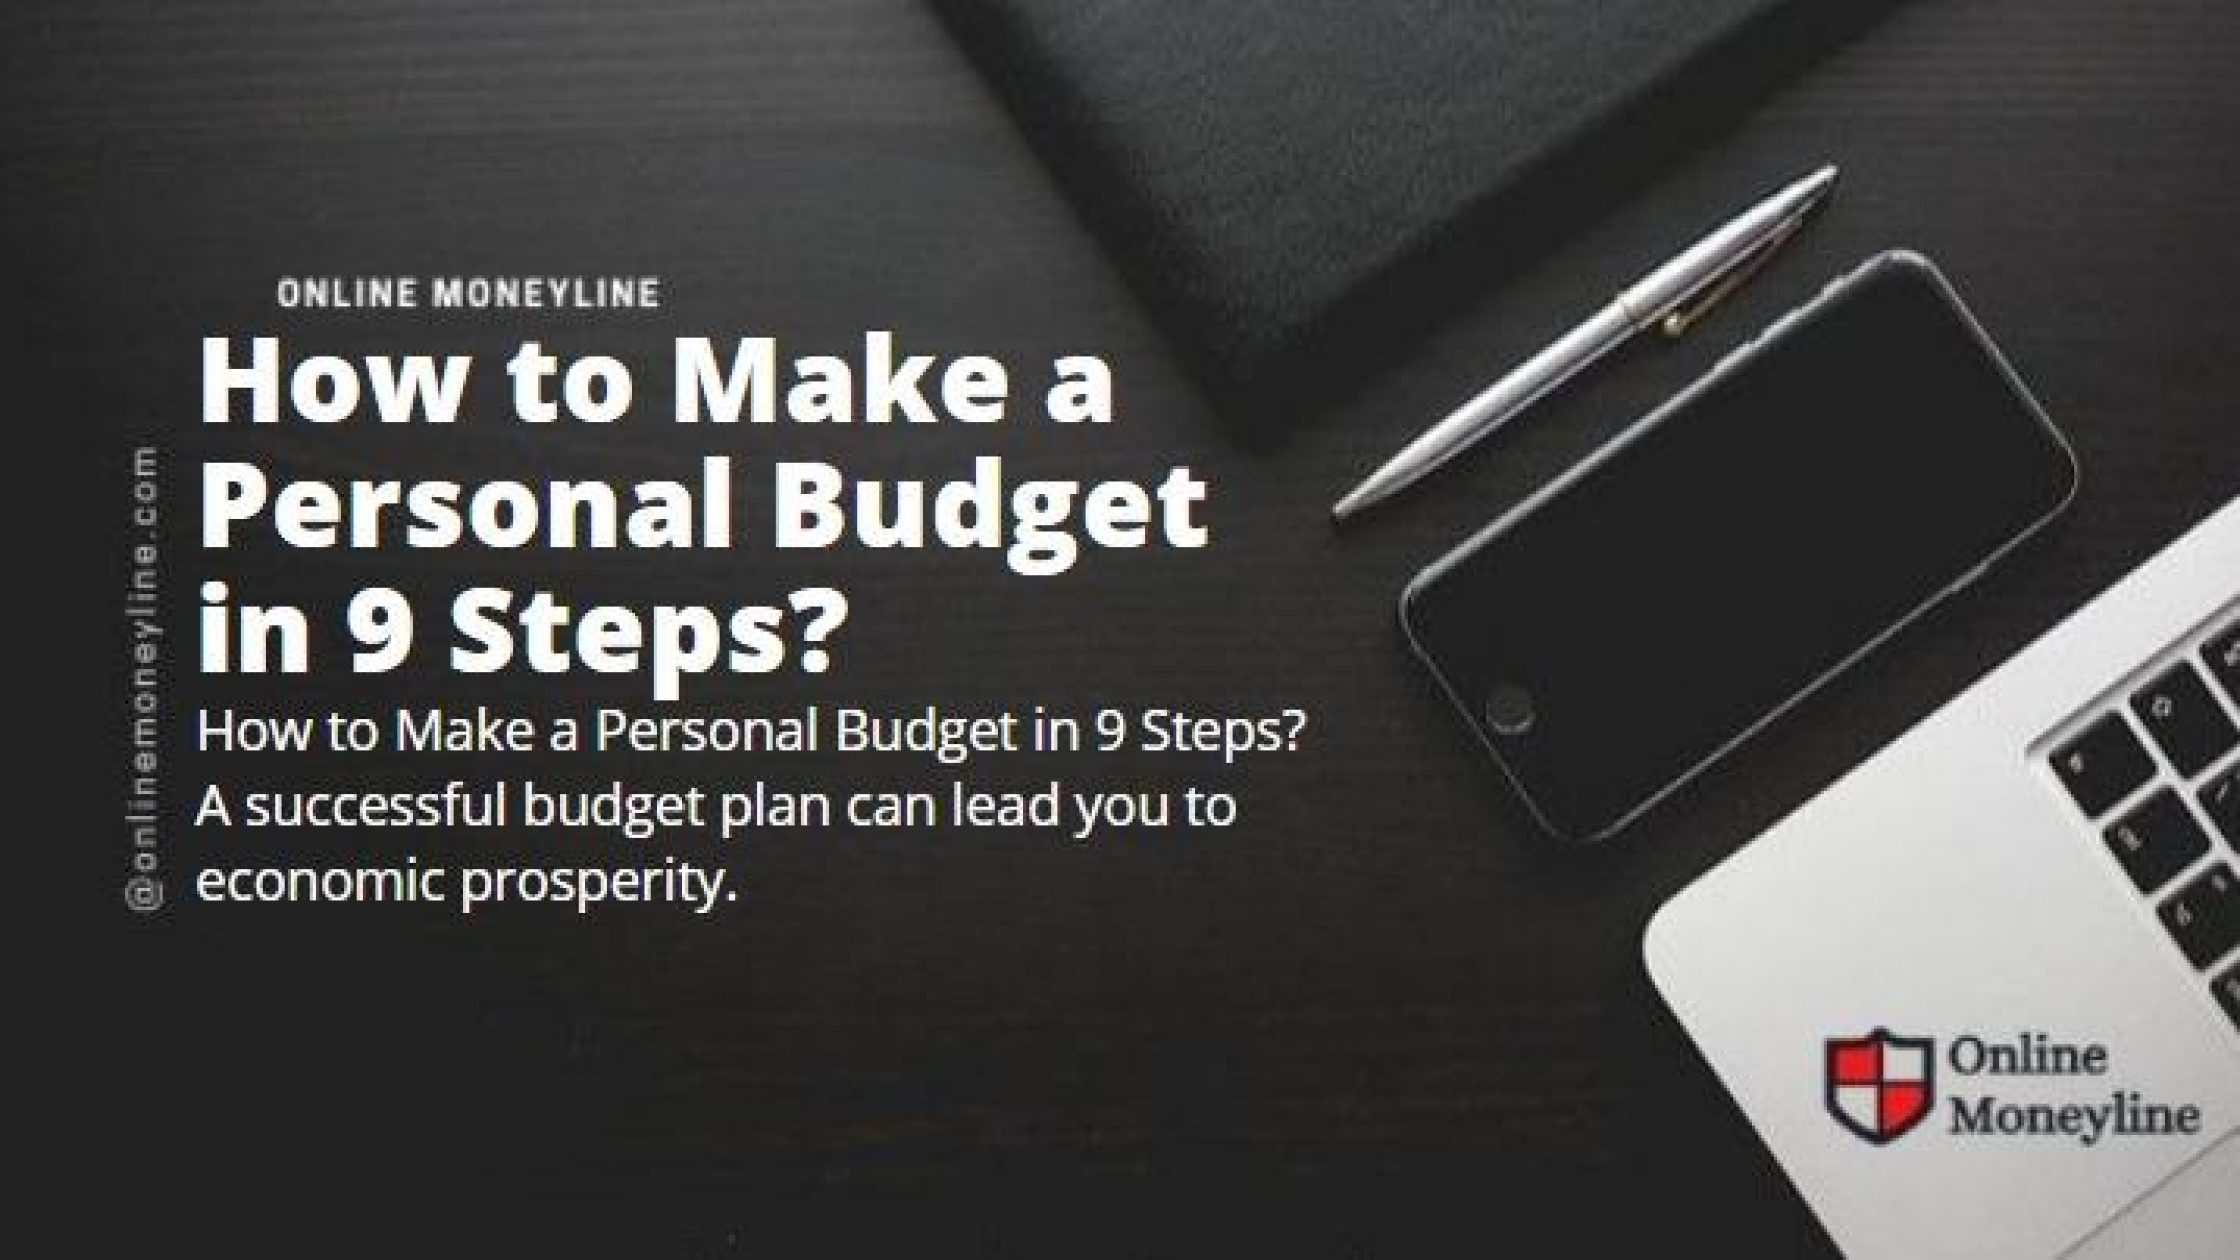 How to Make a Personal Budget in 9 Steps?